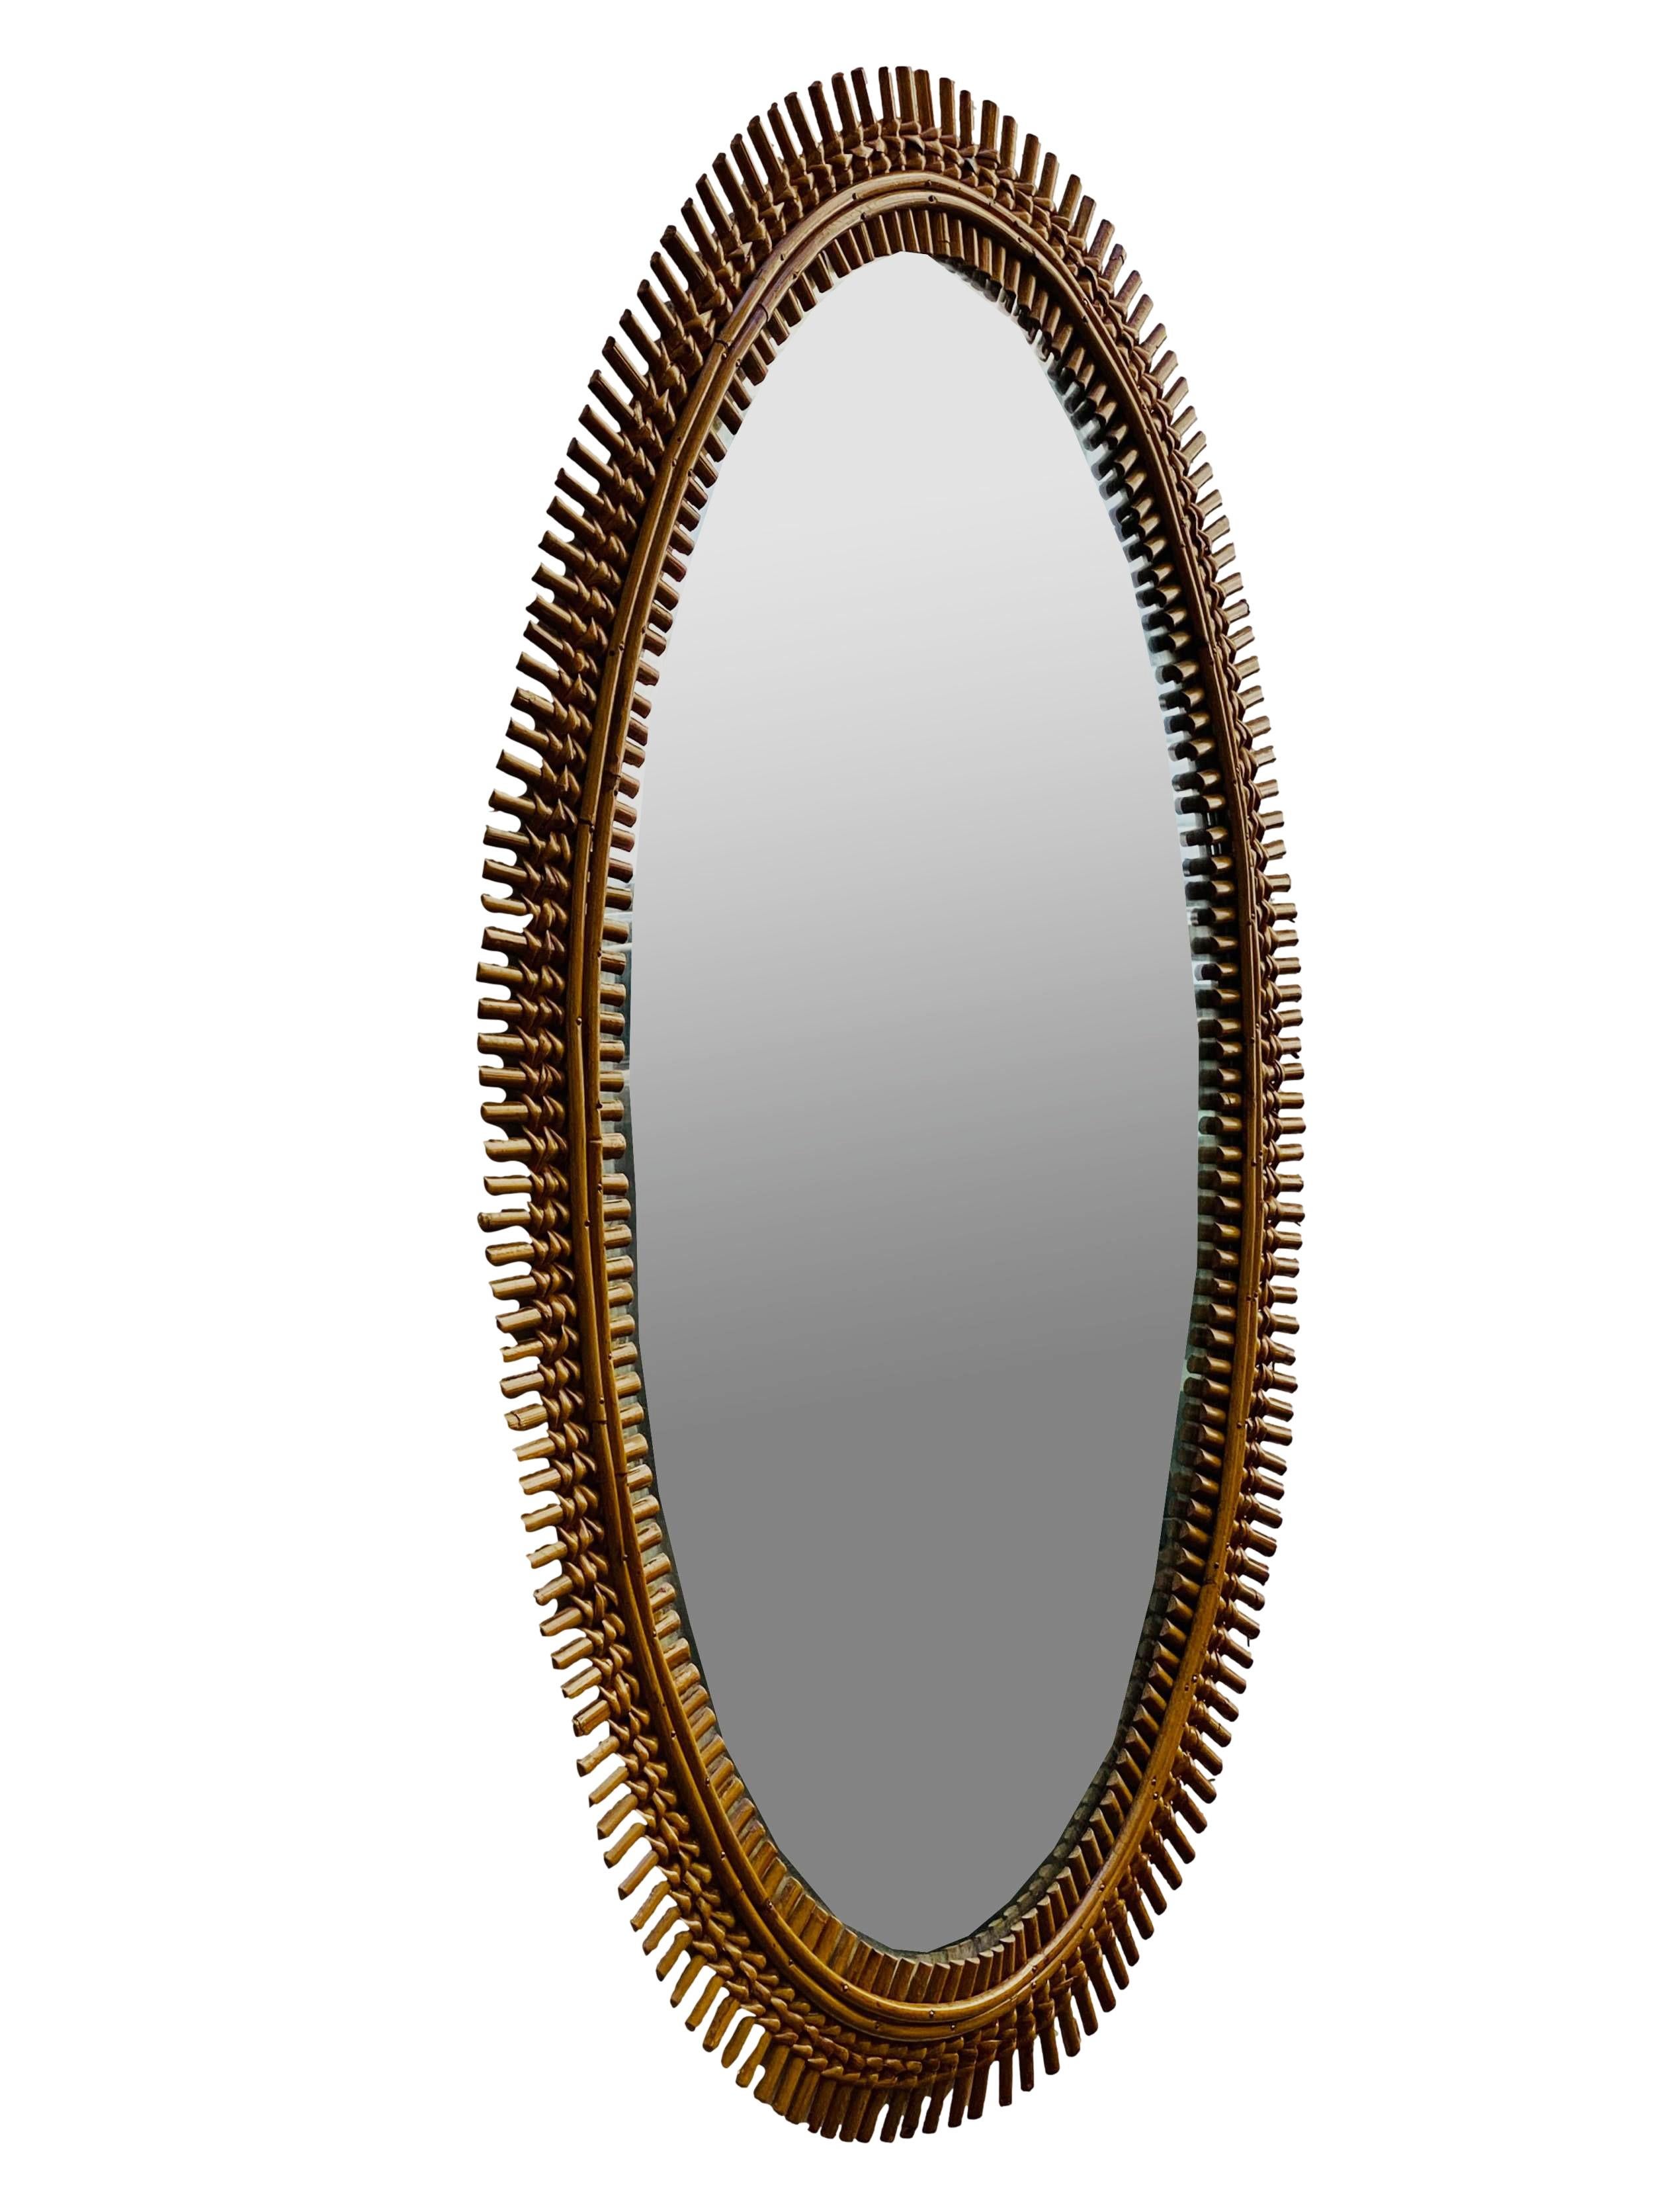 Large oval bamboo wall mirror, designed by renowned designer Olaf von Bohr for the Bonacina company. It is definitely interesting because of its slender oval shape and its eye-catching sunburst construction with balanced proportions, features